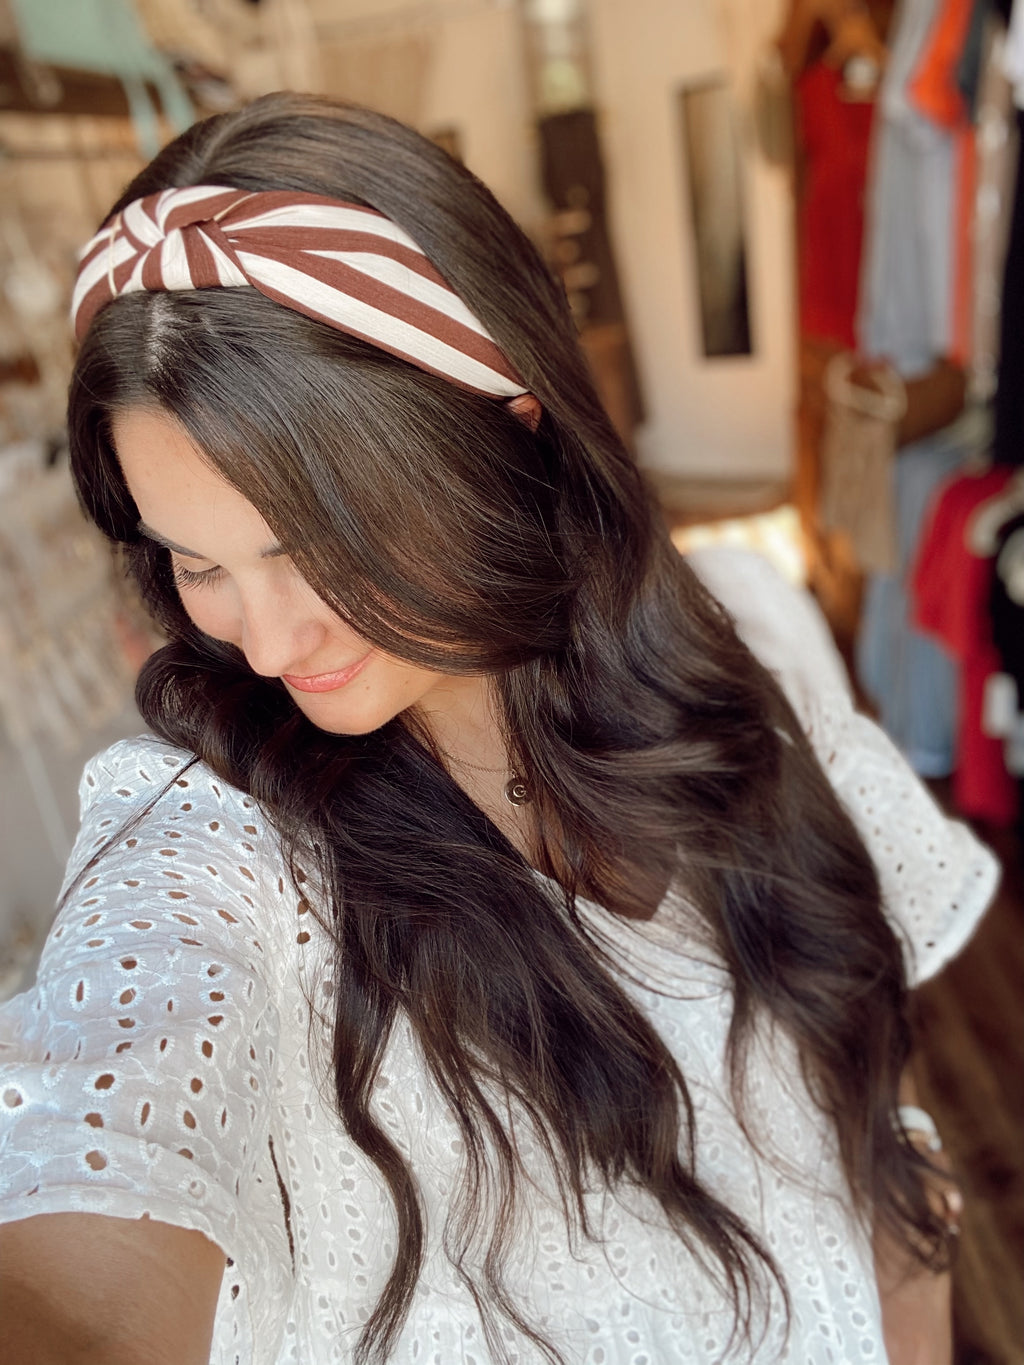 Brown Striped Knotted Headband